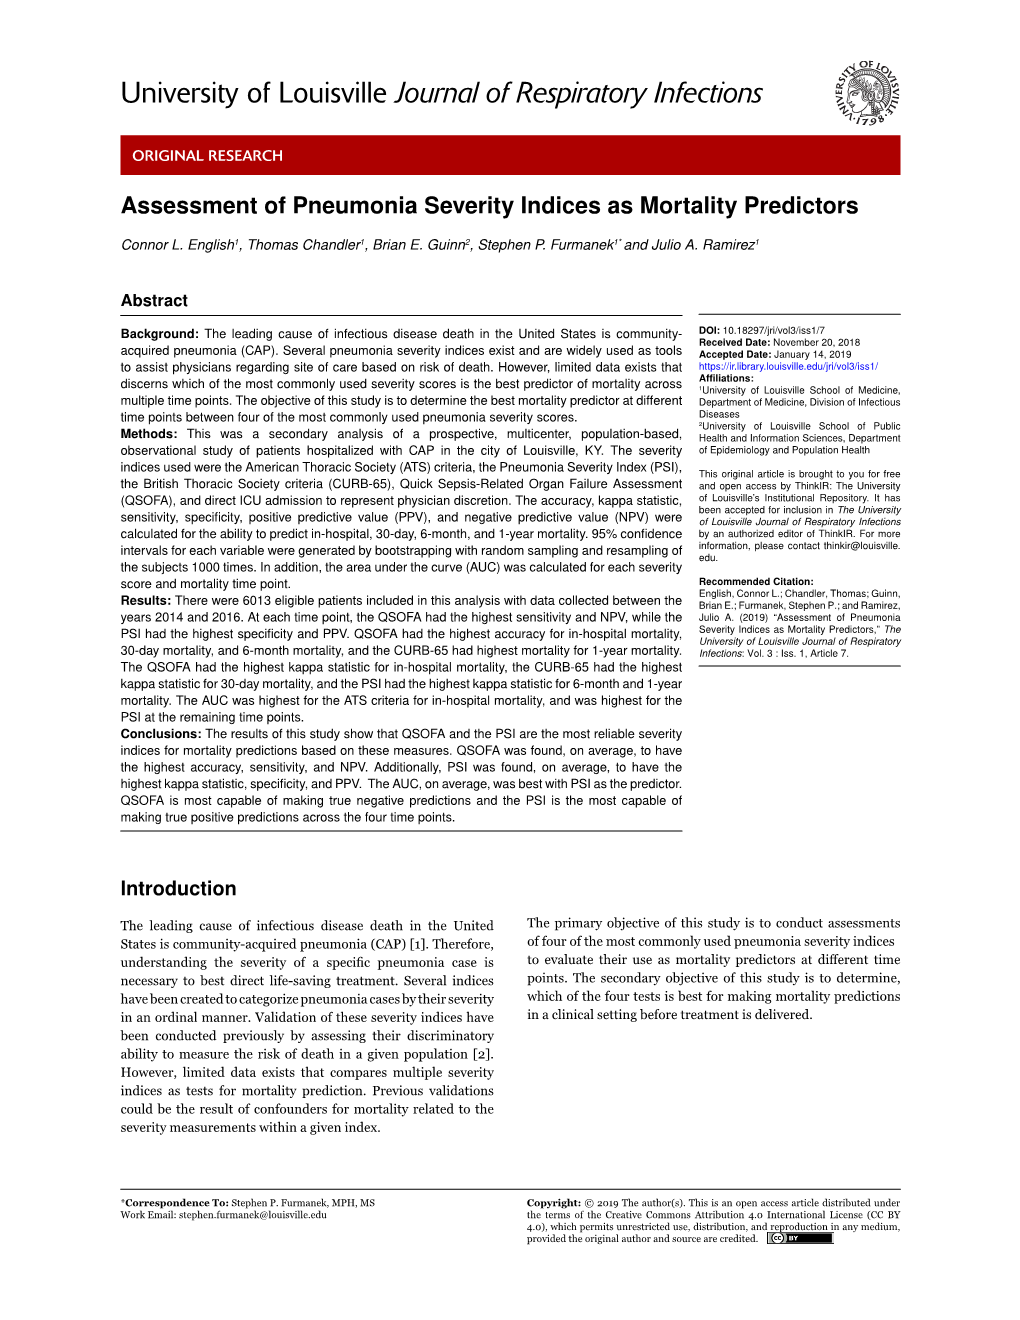 Assessment of Pneumonia Severity Indices As Mortality Predictors